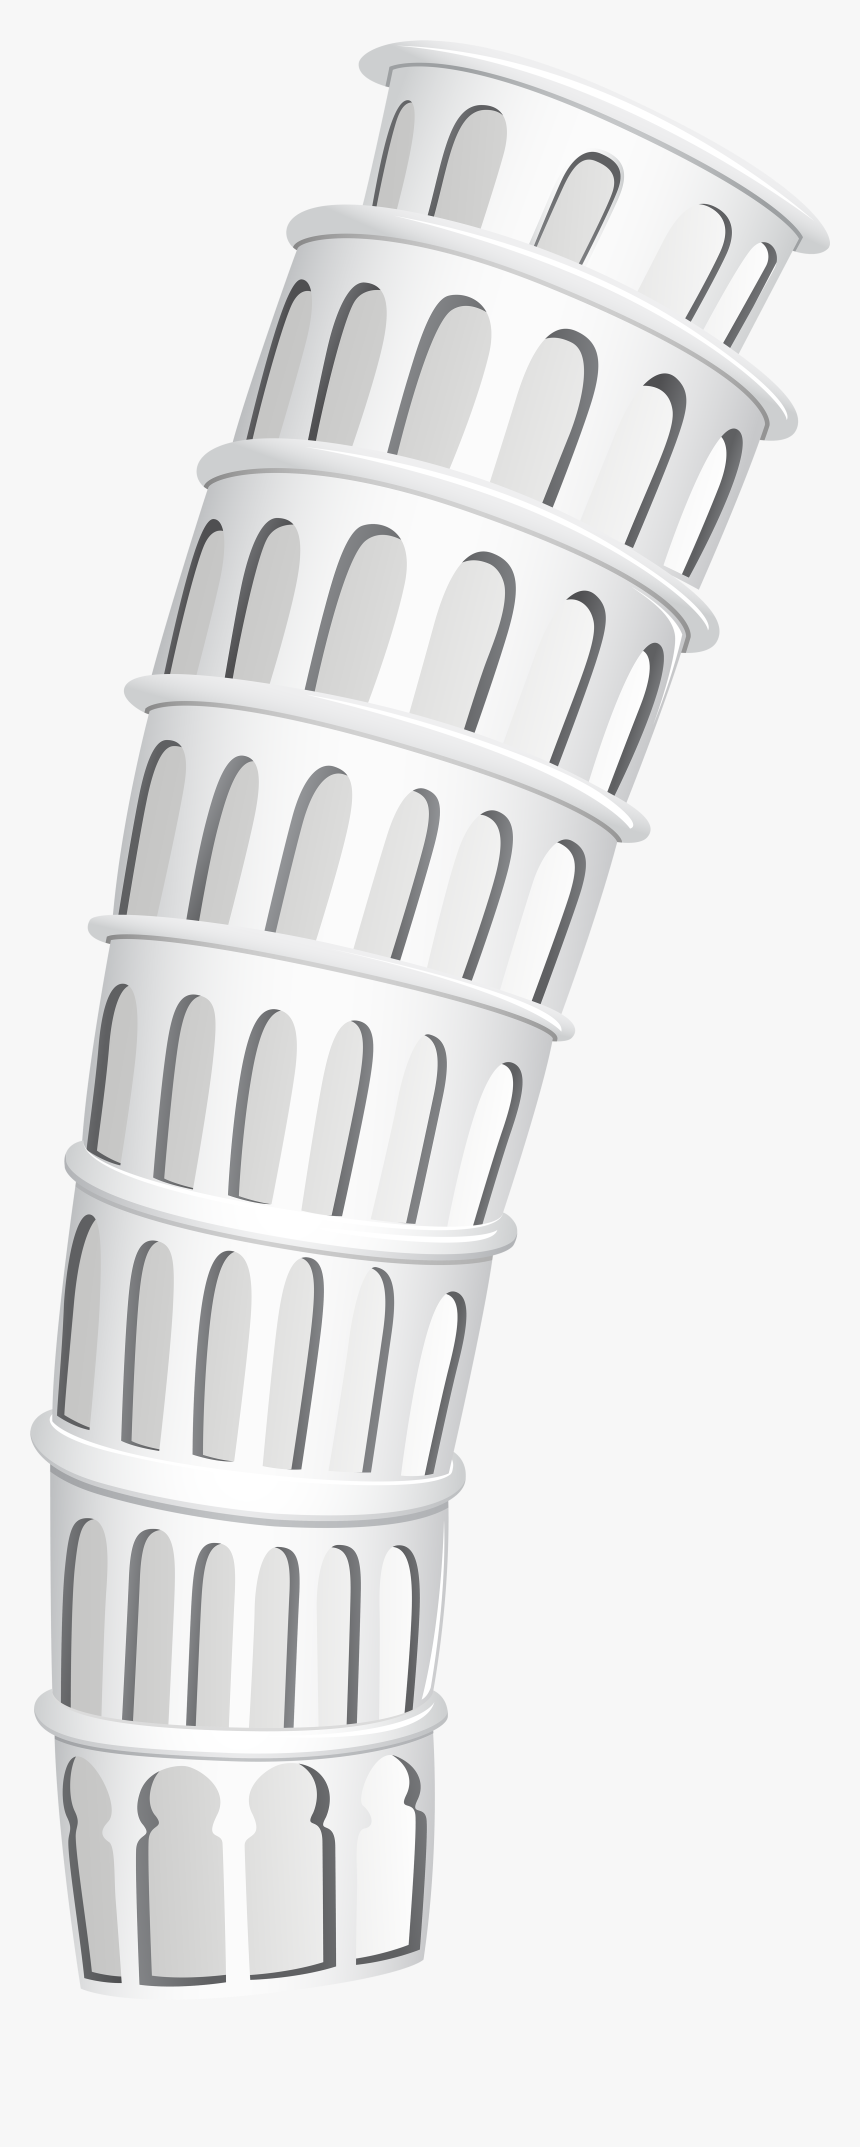 Leaning Tower Of Pisa Png Clip Art - Leaning Tower Of Pisa Transparent Background Art, Png Download, Free Download